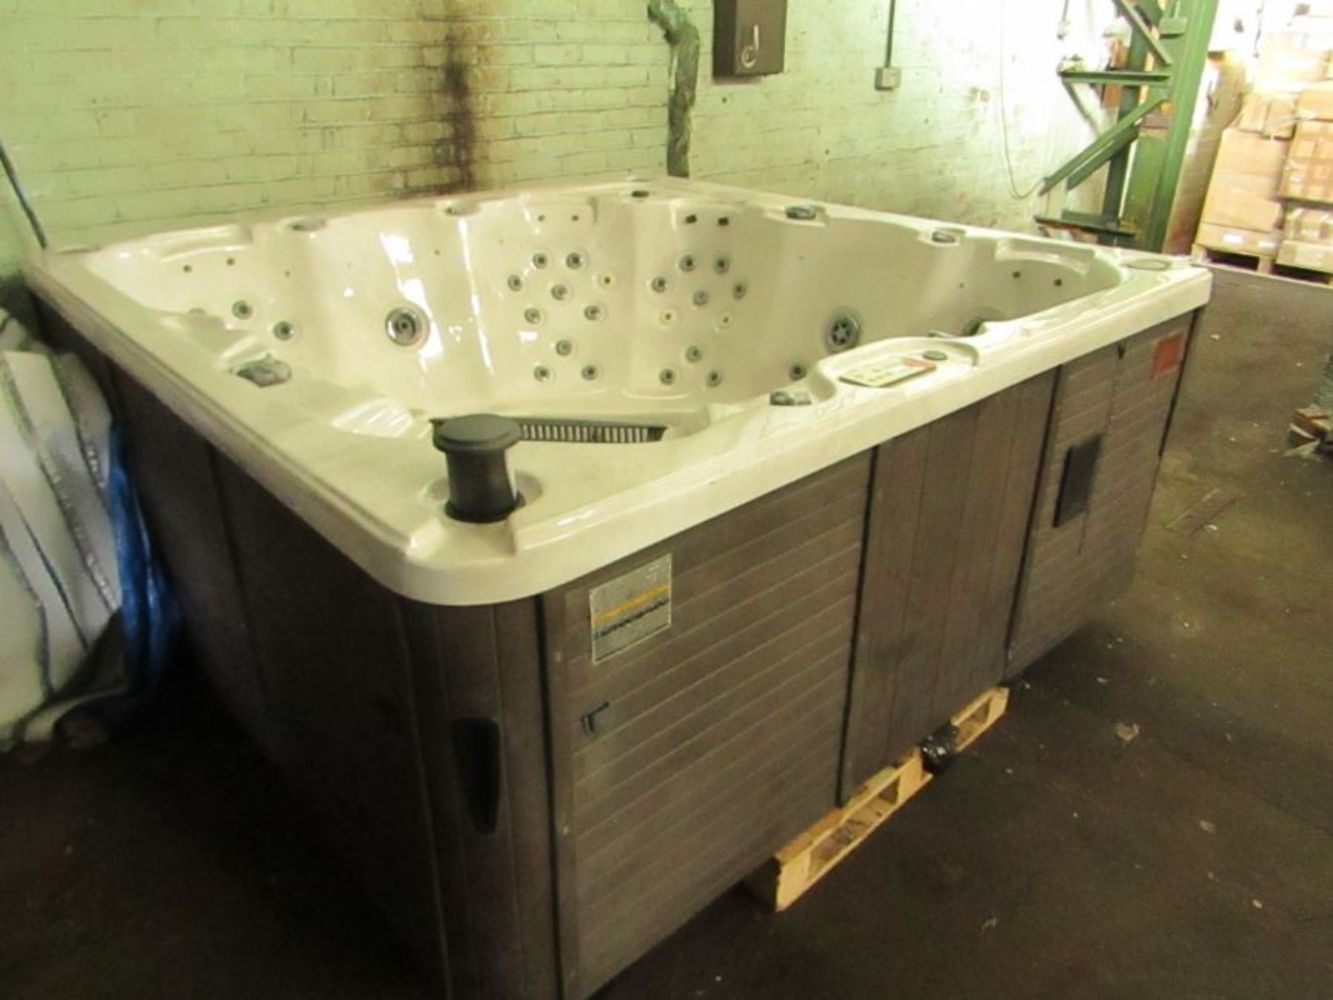 NEW LOWER STARTING PRICE!!! Canadian Spa Vancouver 6 person Hot tub